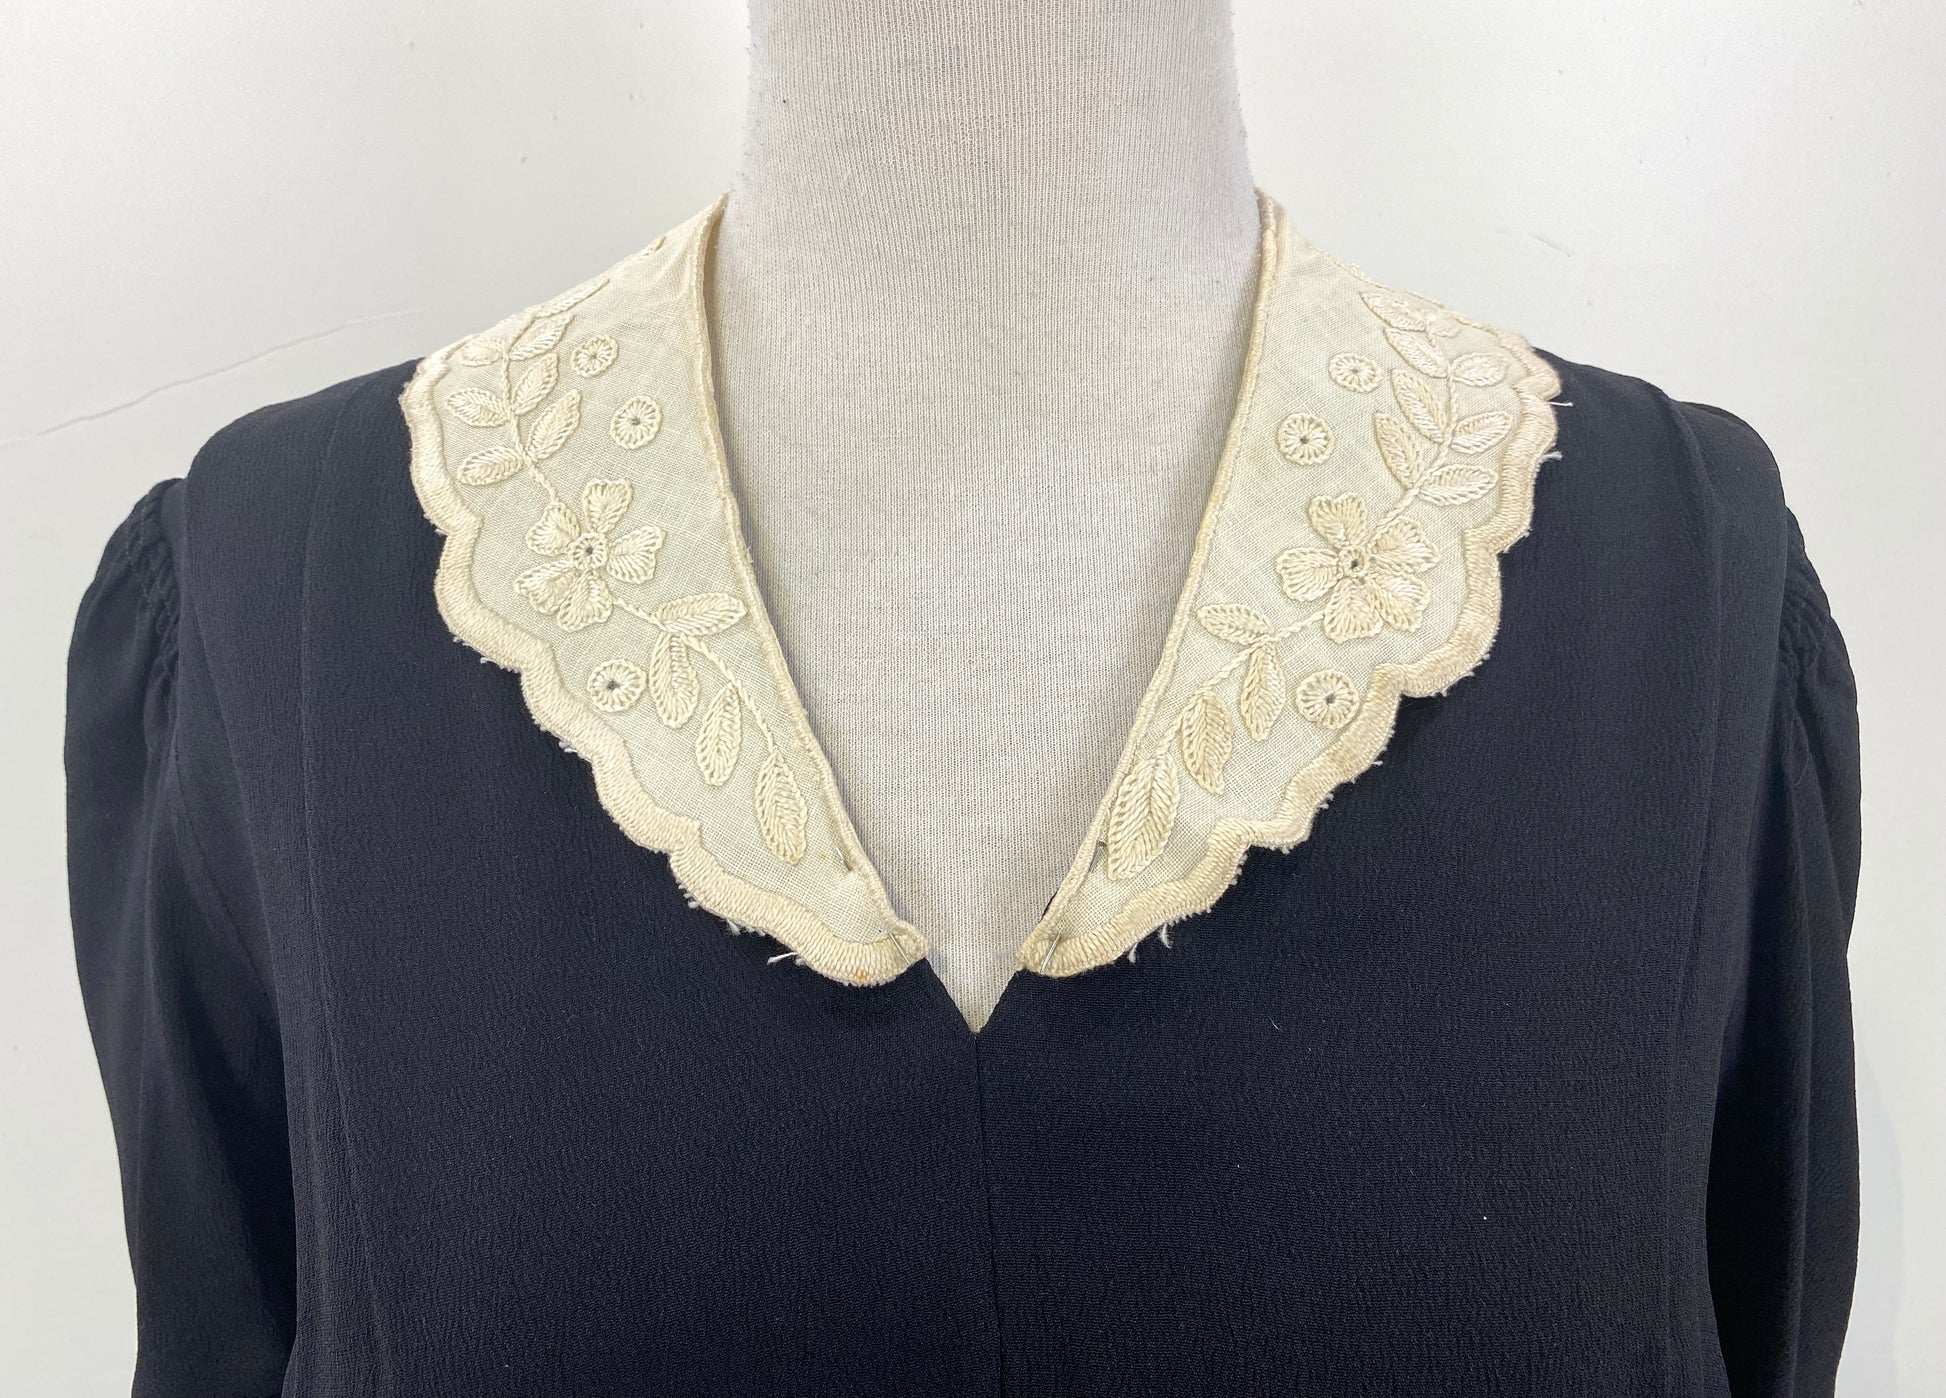 Antique Edwardian Cream Cotton Floral Embroidered Collar With Scalloped Edges